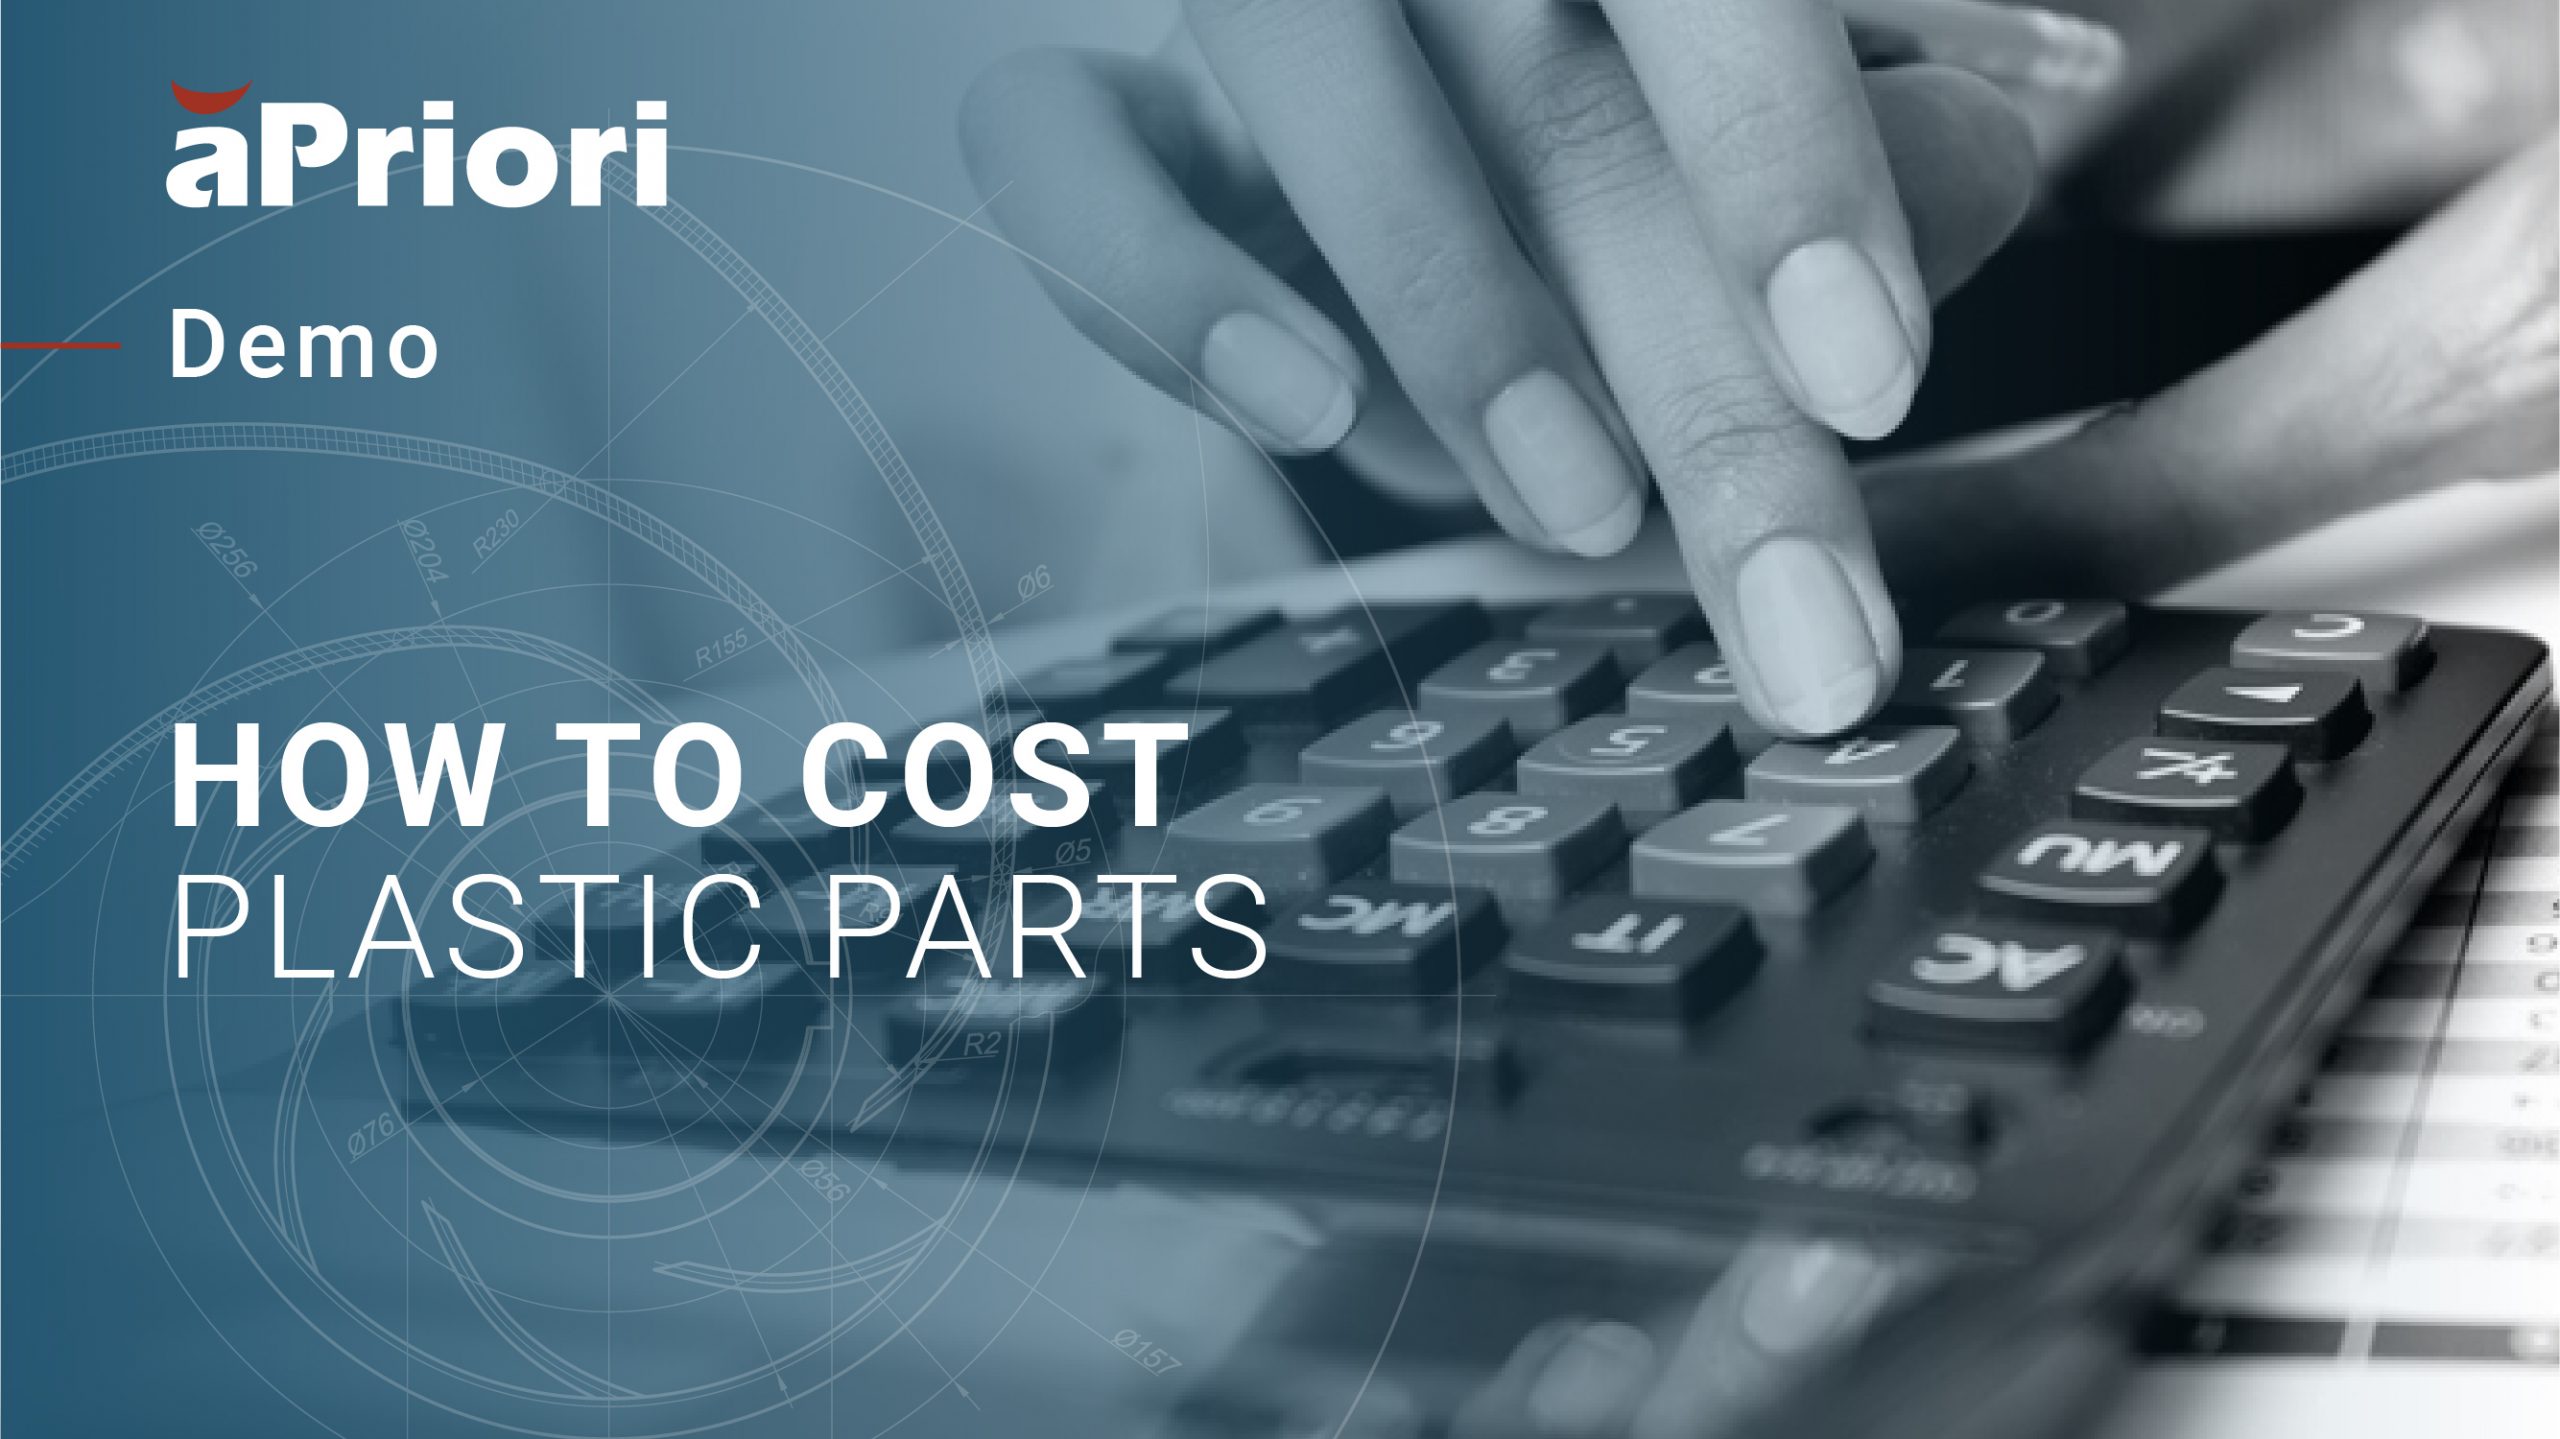 DEMO: How To Cost Plastic Parts With aPriori